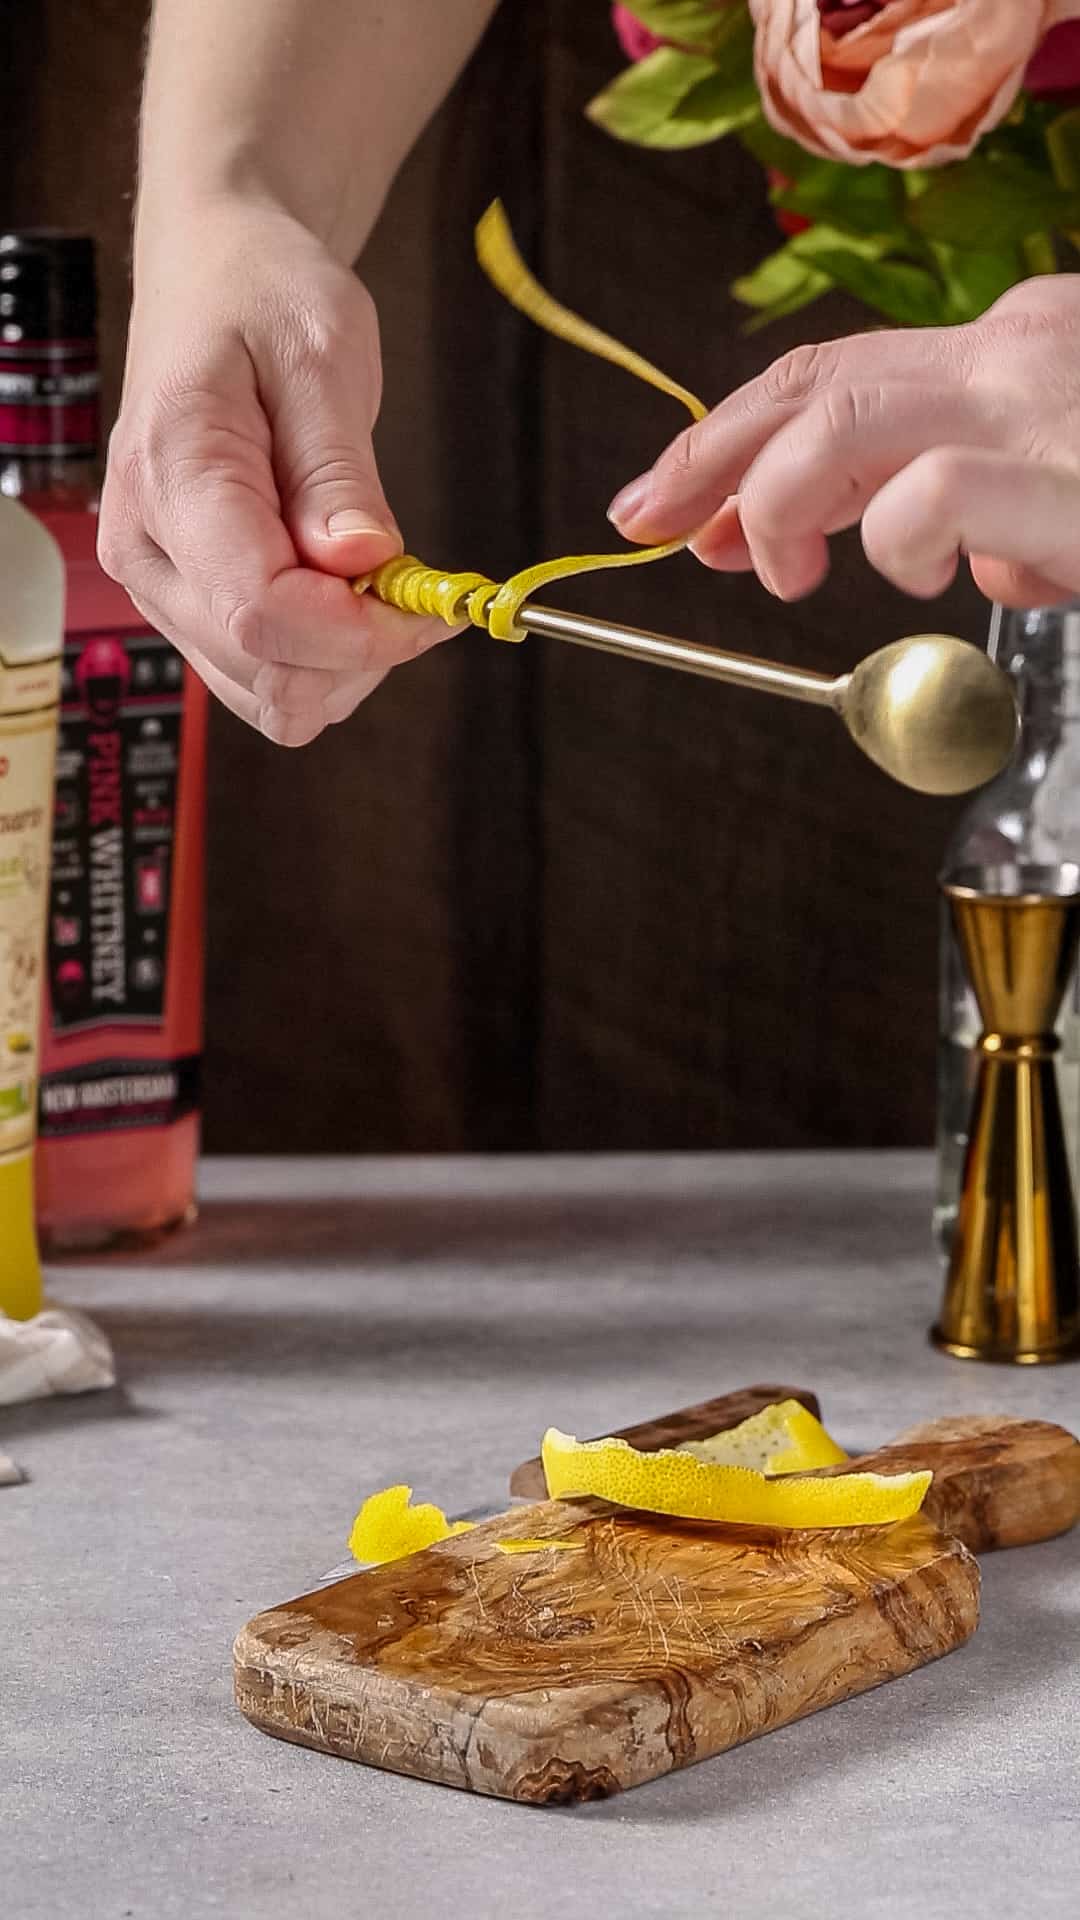 Prepping the garnish by wrapping the lemon peel around the spoon handle.